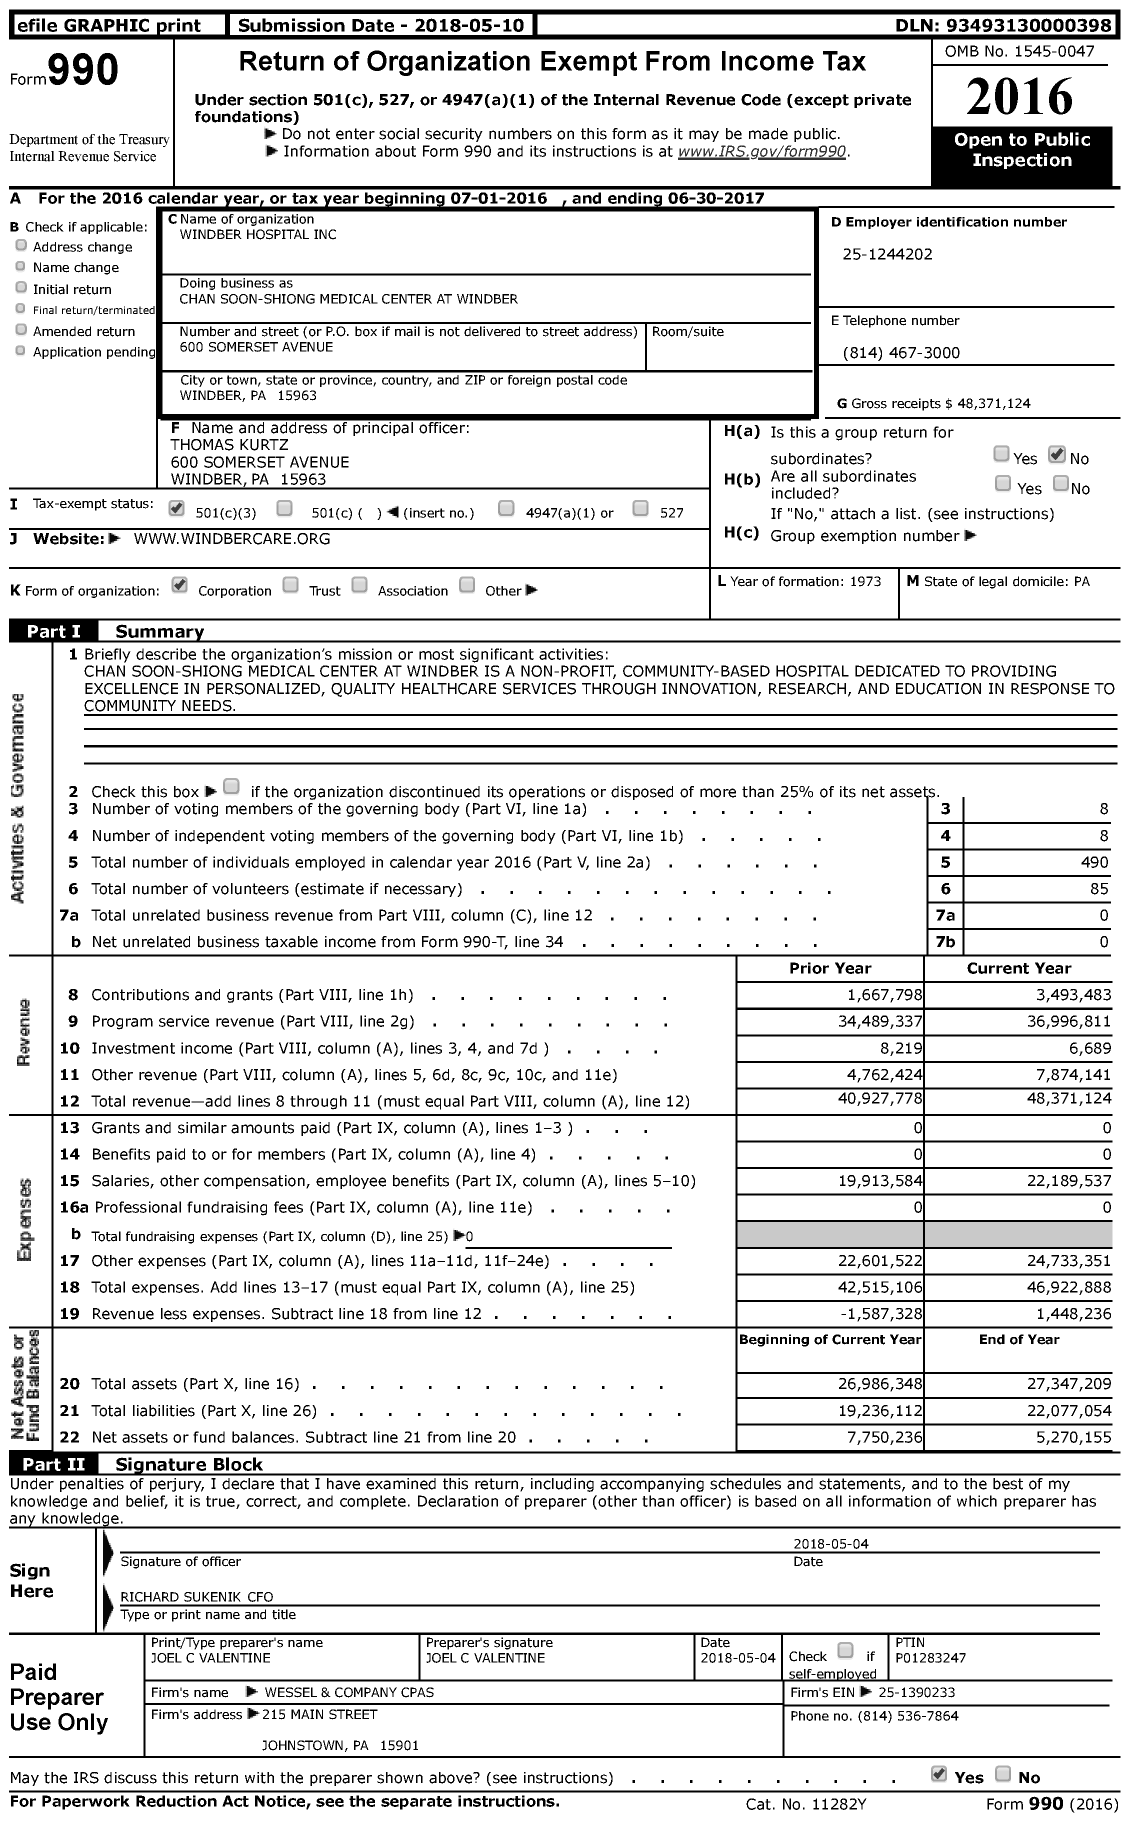 Image of first page of 2016 Form 990 for Chan Soon-Shiong Medical Center at Windber (CSSMCW)